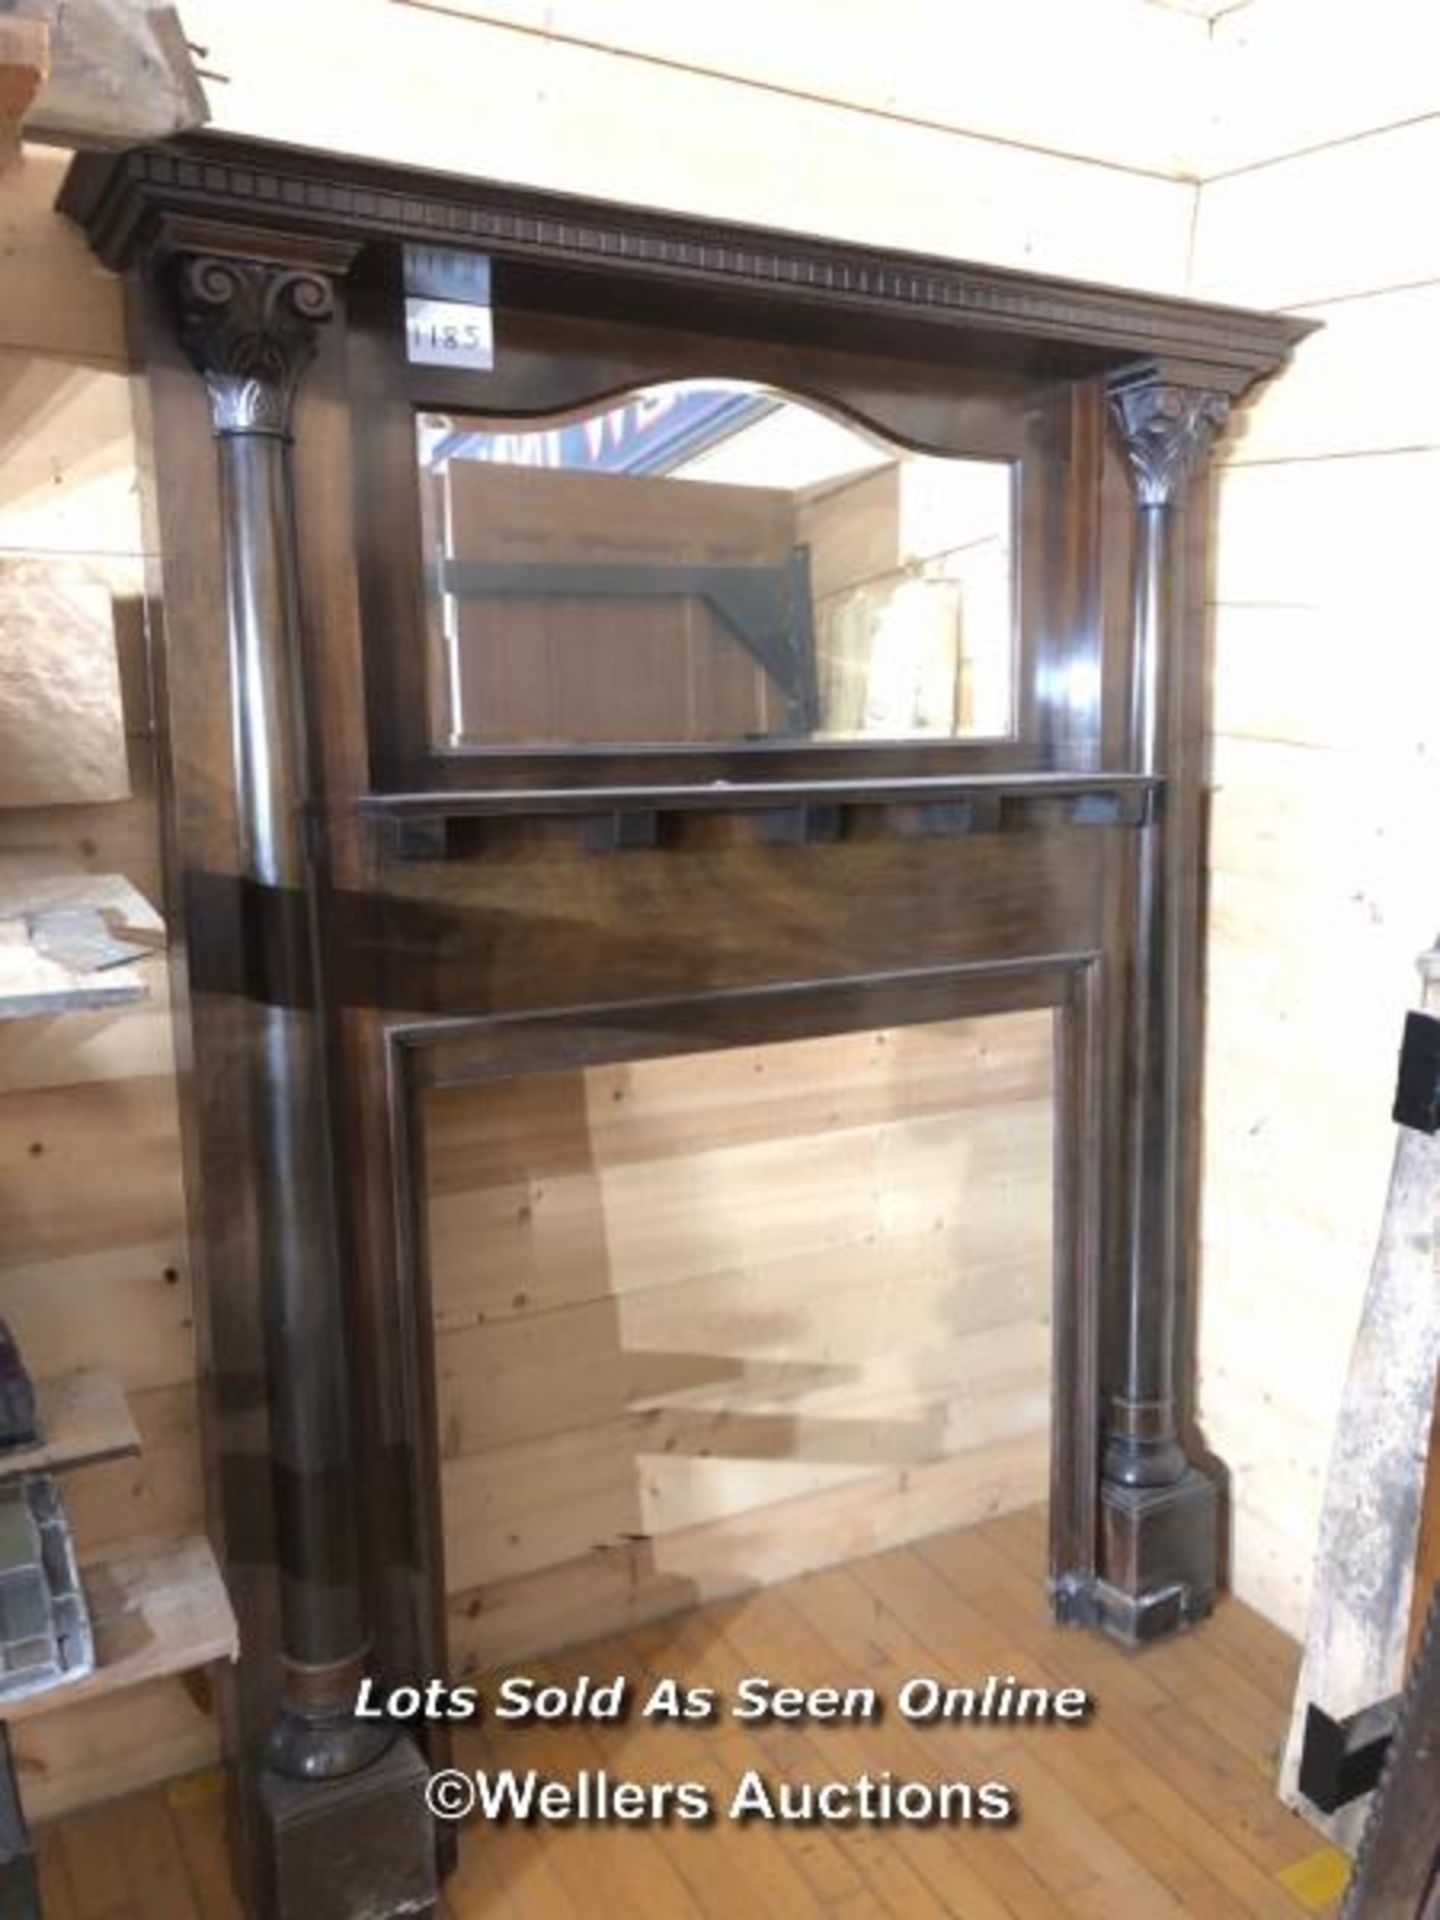 OAK FIREPLACE SURROUND, WITH BEVILED OVER MANTLE MIRROR AND FLANKED BY TWO DECORATIVE COLUMNS,